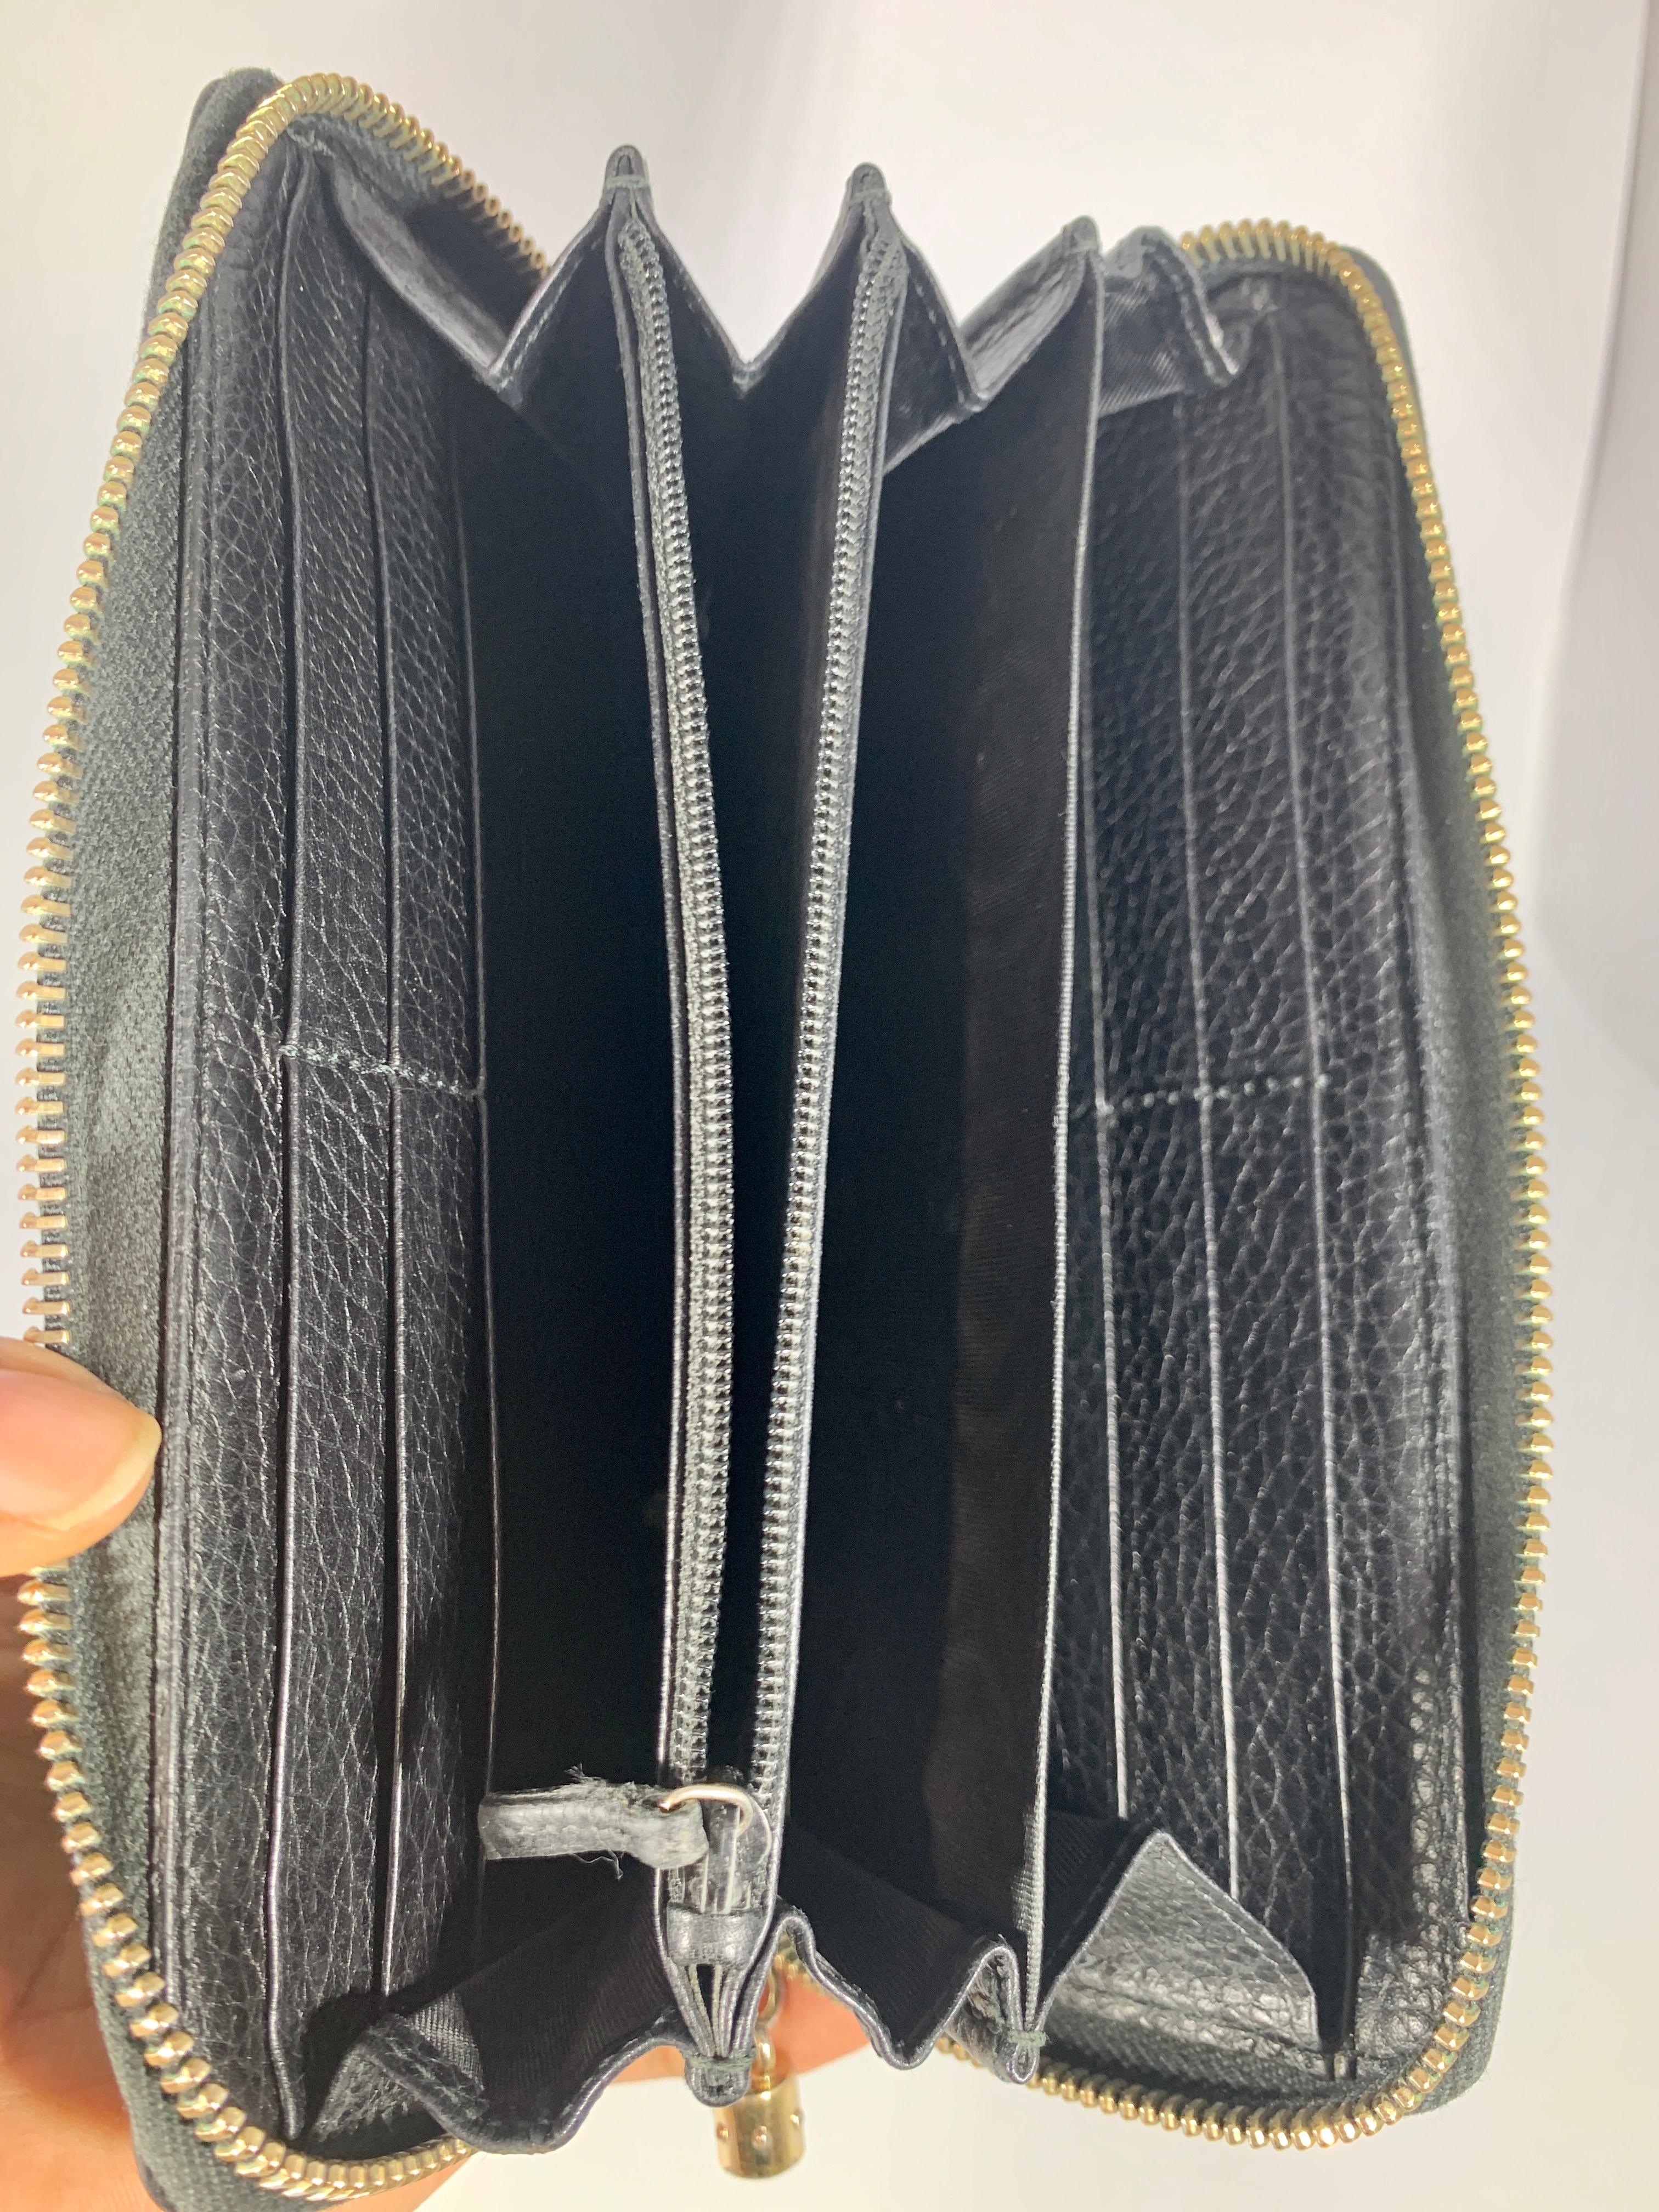 This is an authentic GUCCI Monogram Zippy Wallet
I zippered pocket , one coin pocket and 12 credit card slots 
Condition of The Wallet is  Very good.
No Stains inside, No Fading ,  no rips
Zipper works properly
Metal part show minor tarnish
Over all